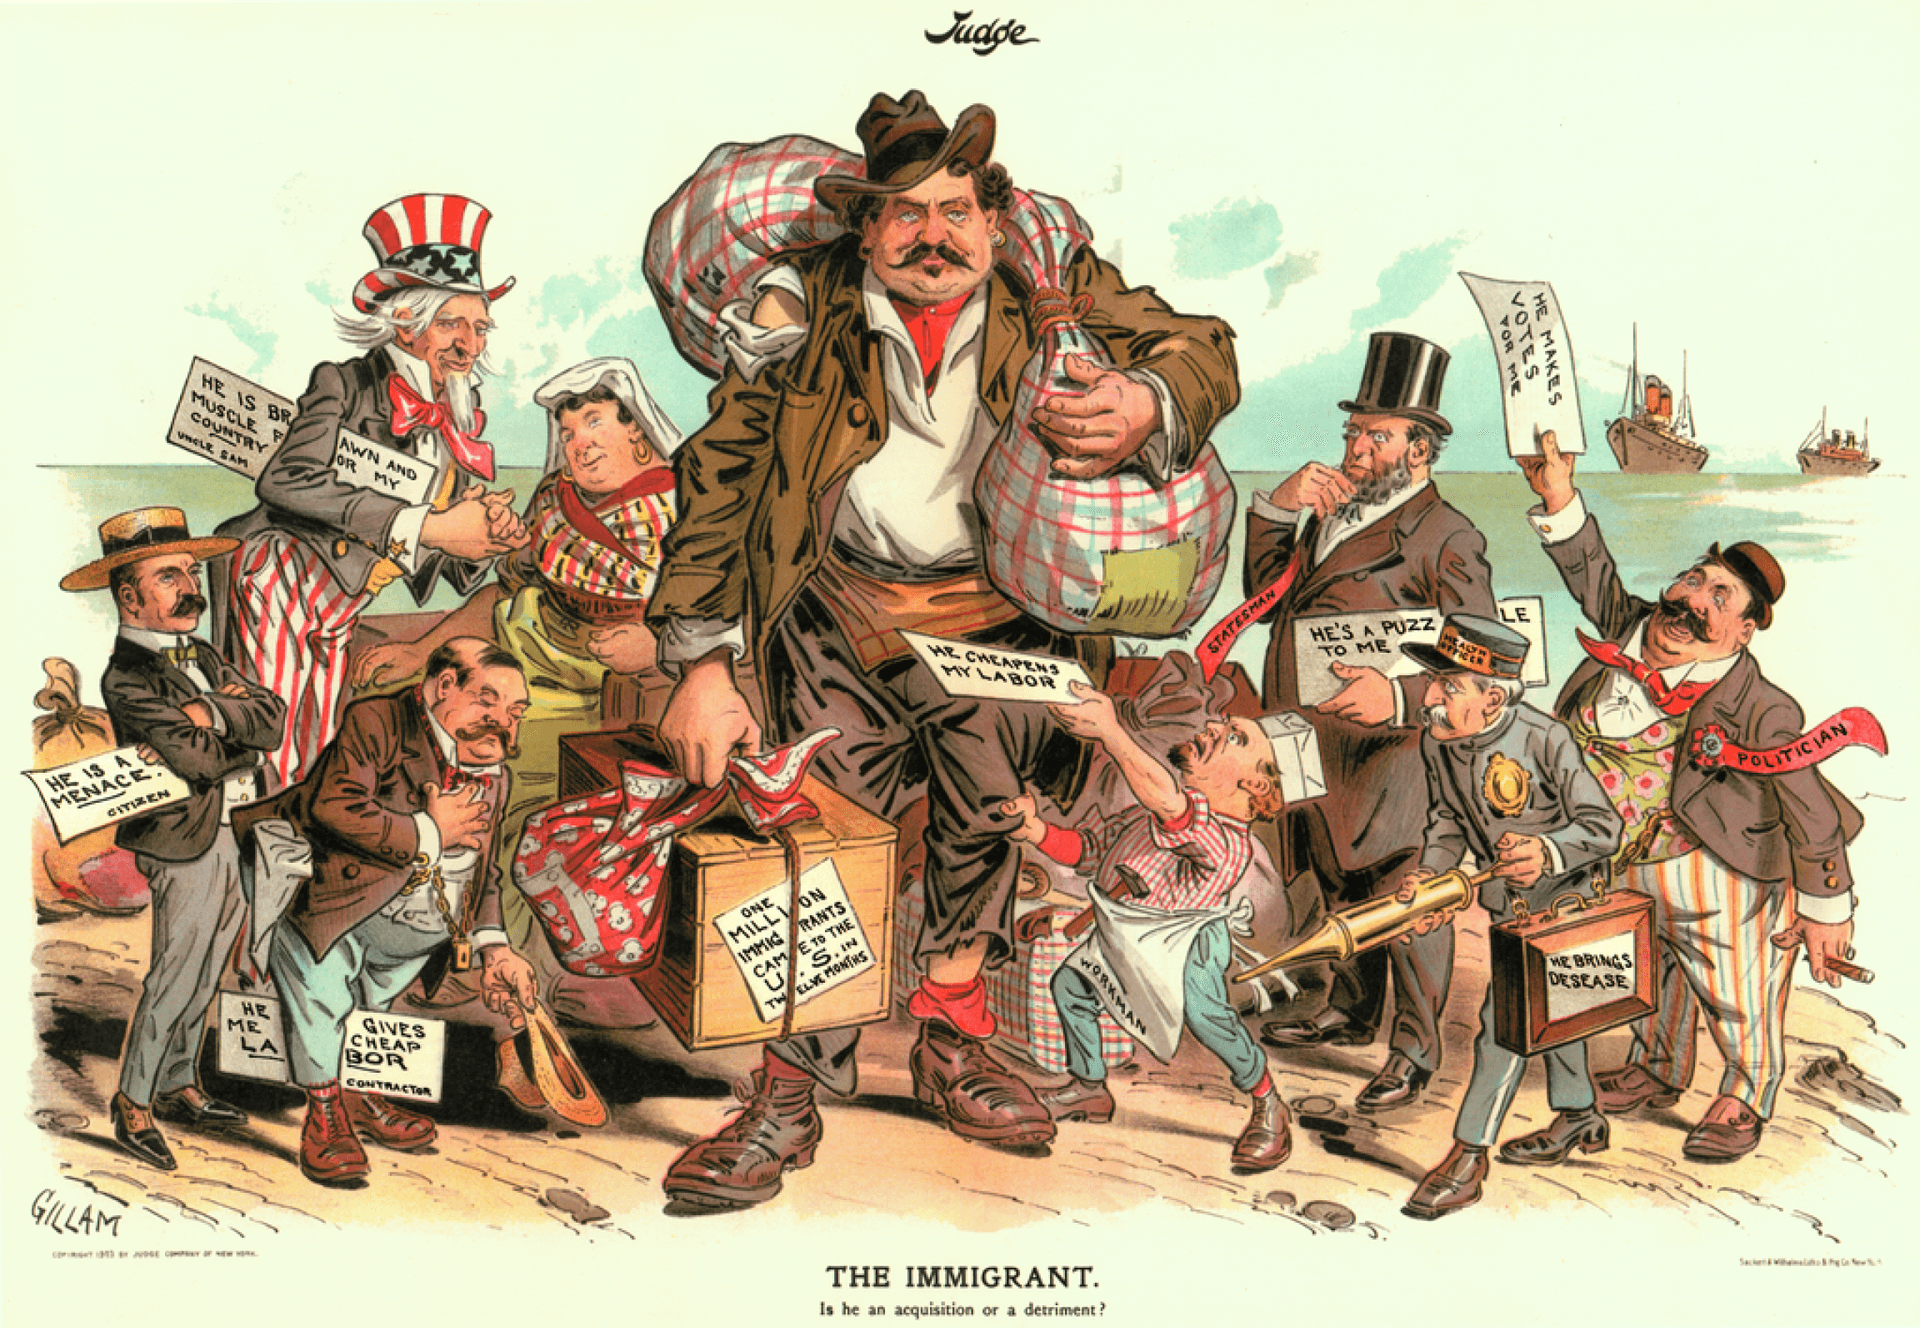 A political cartoon of a caucasian male immigrant with others around him holding signs